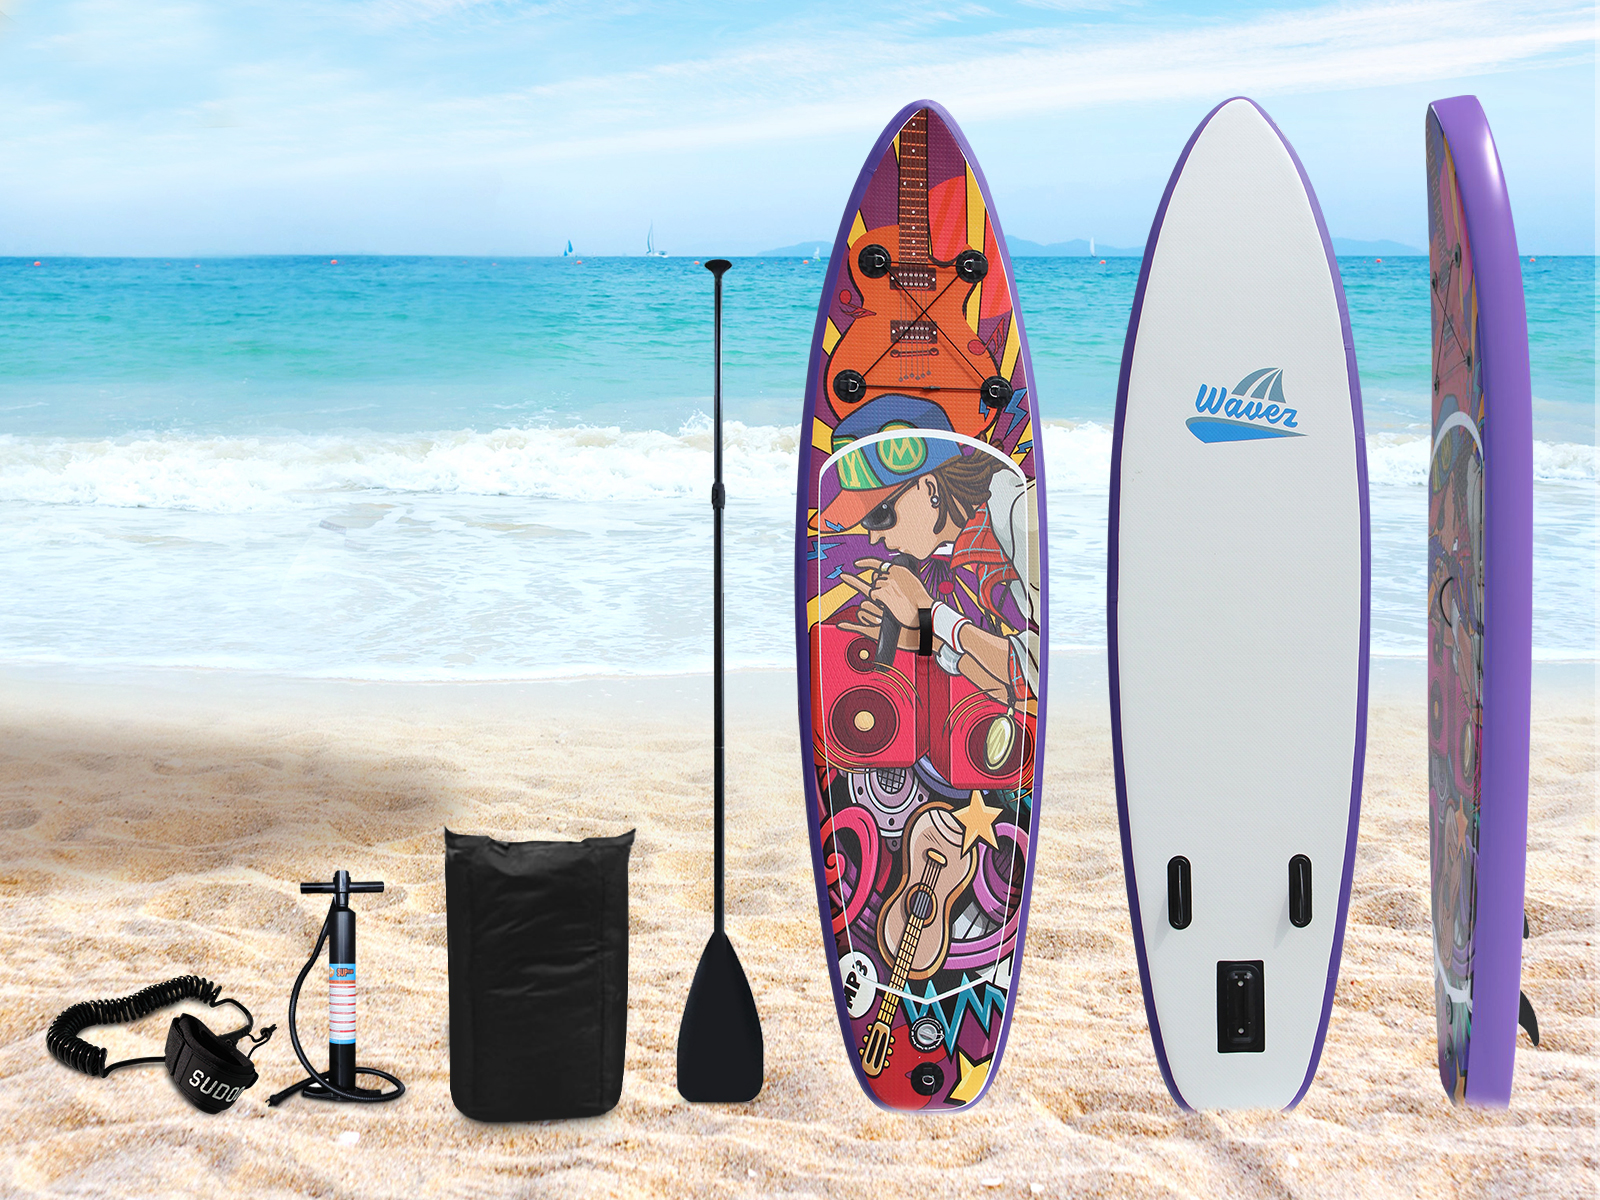 10ft Inflatable Stand-Up Paddleboard incl. Paddle, Pump, Repair Kit & Carry Bag - Three Colours Available